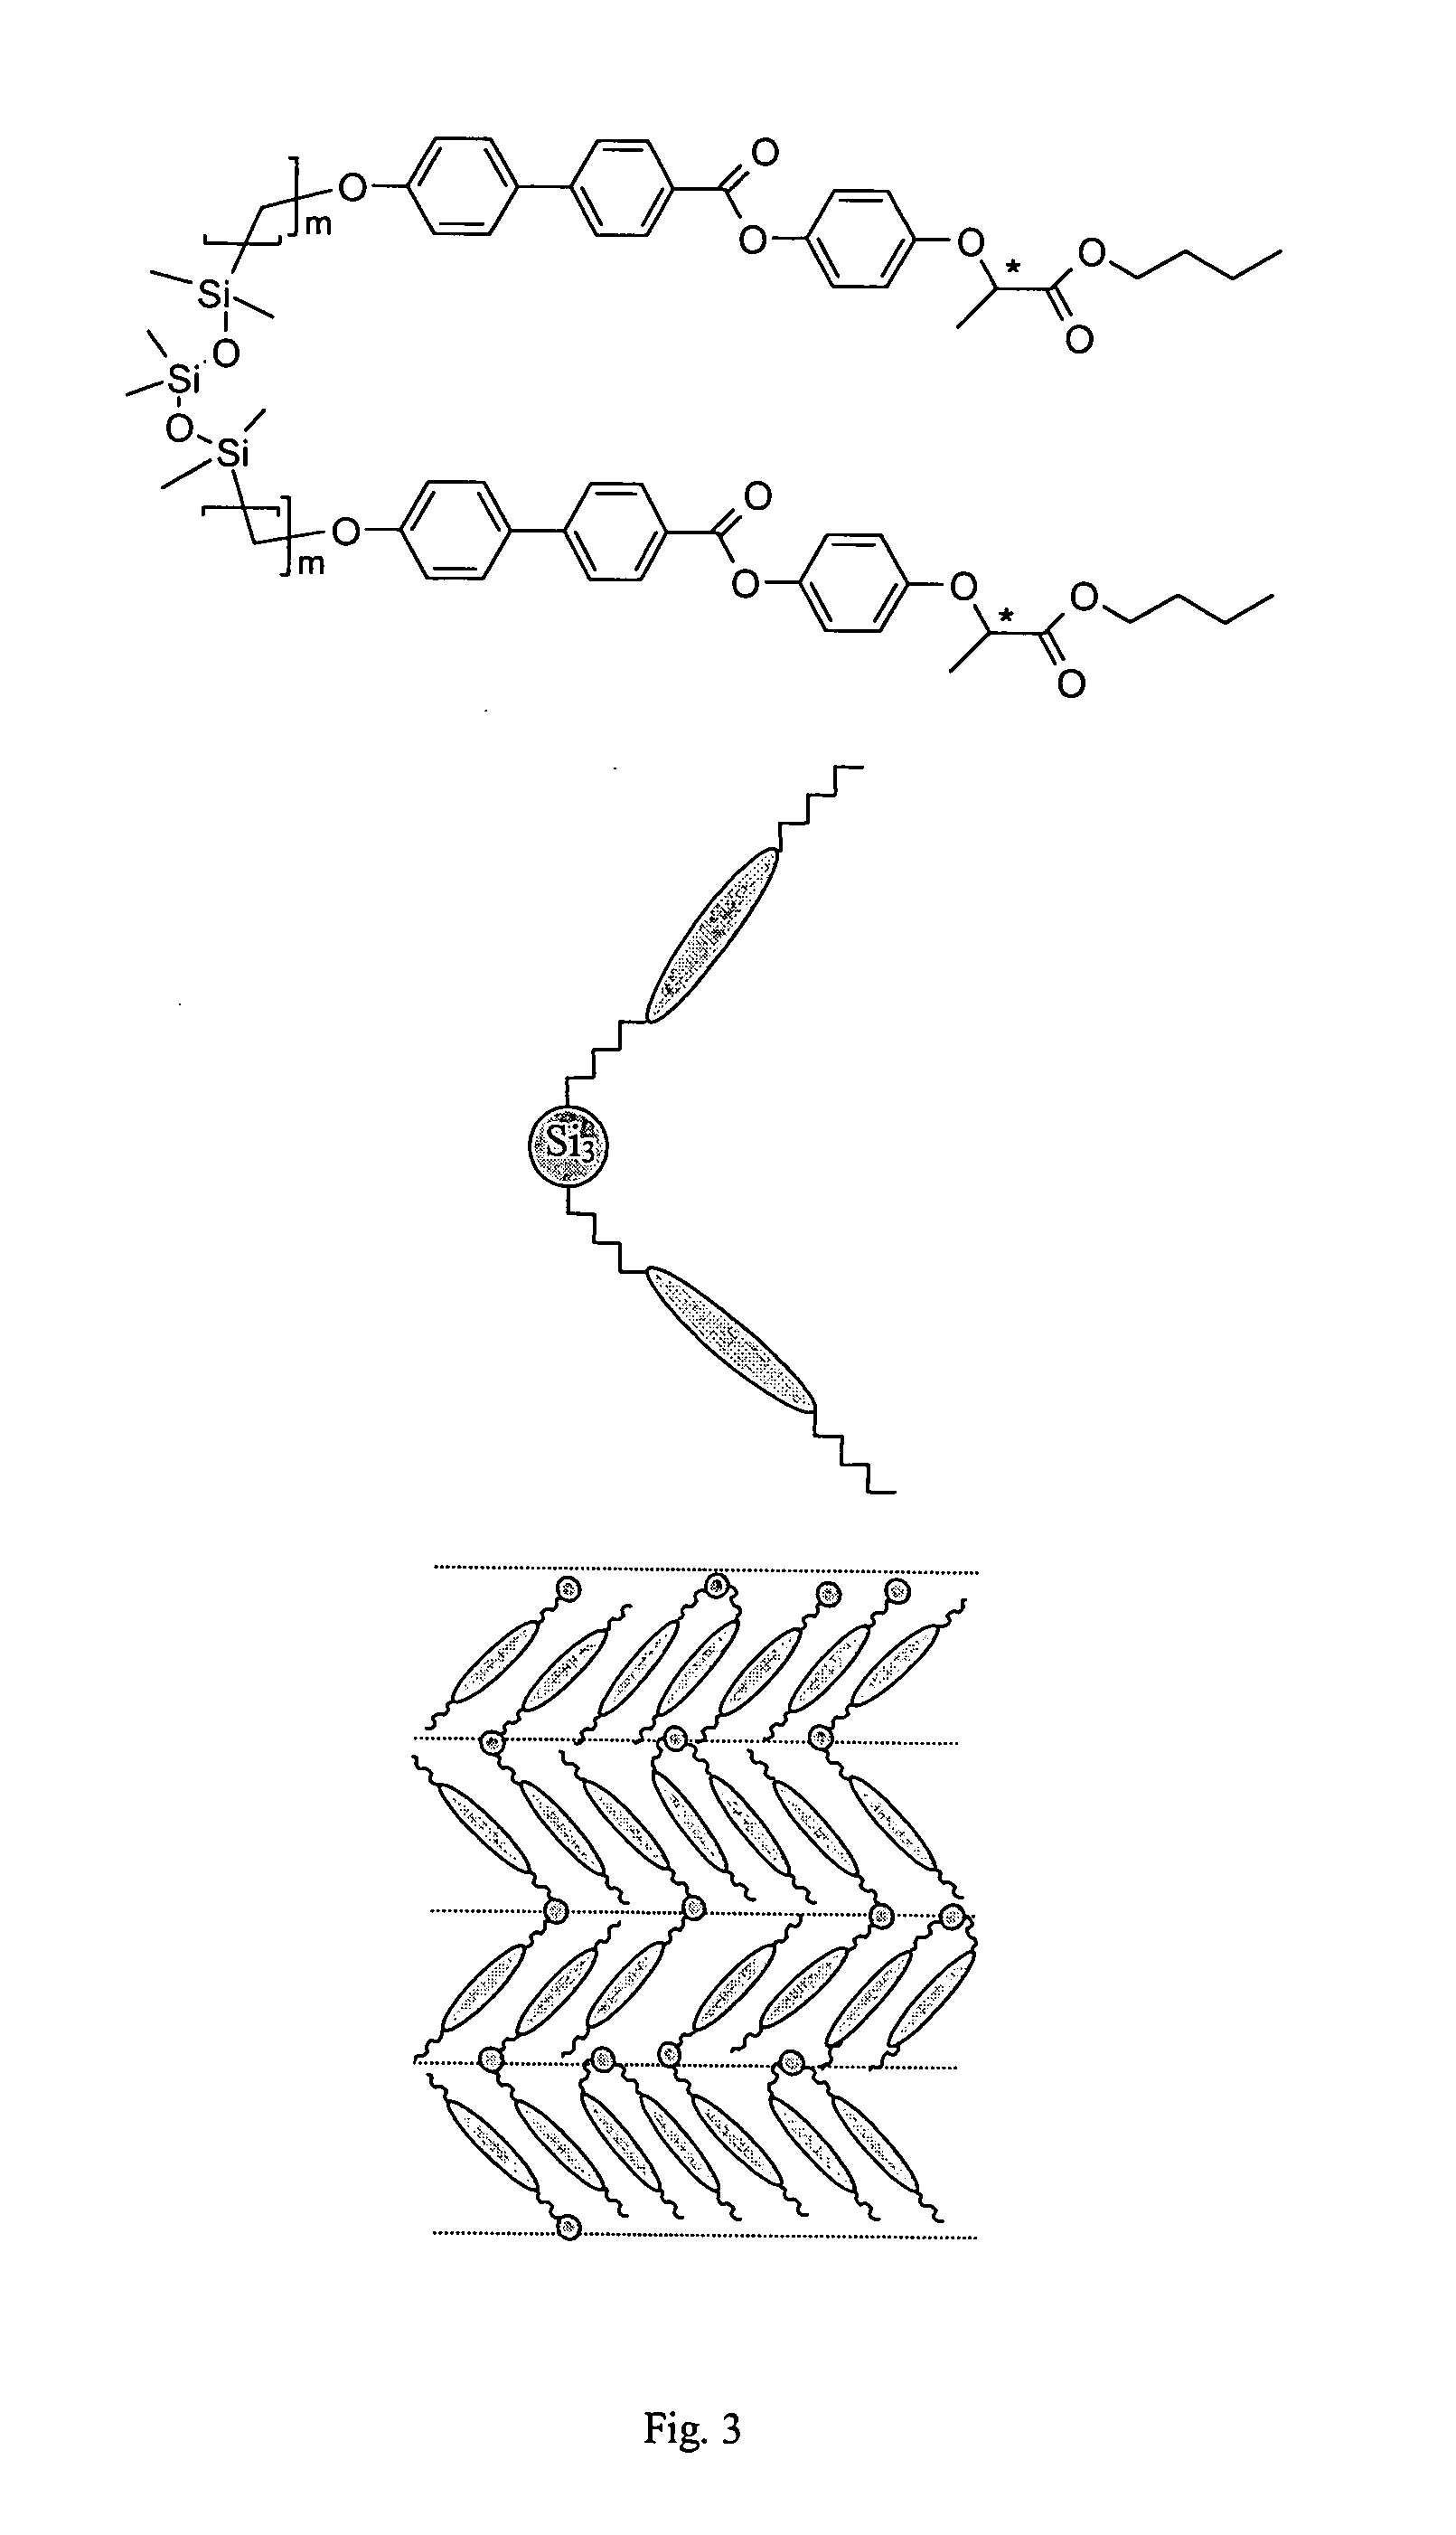 Liquid crystal device for generation and fast switching of high contrast images